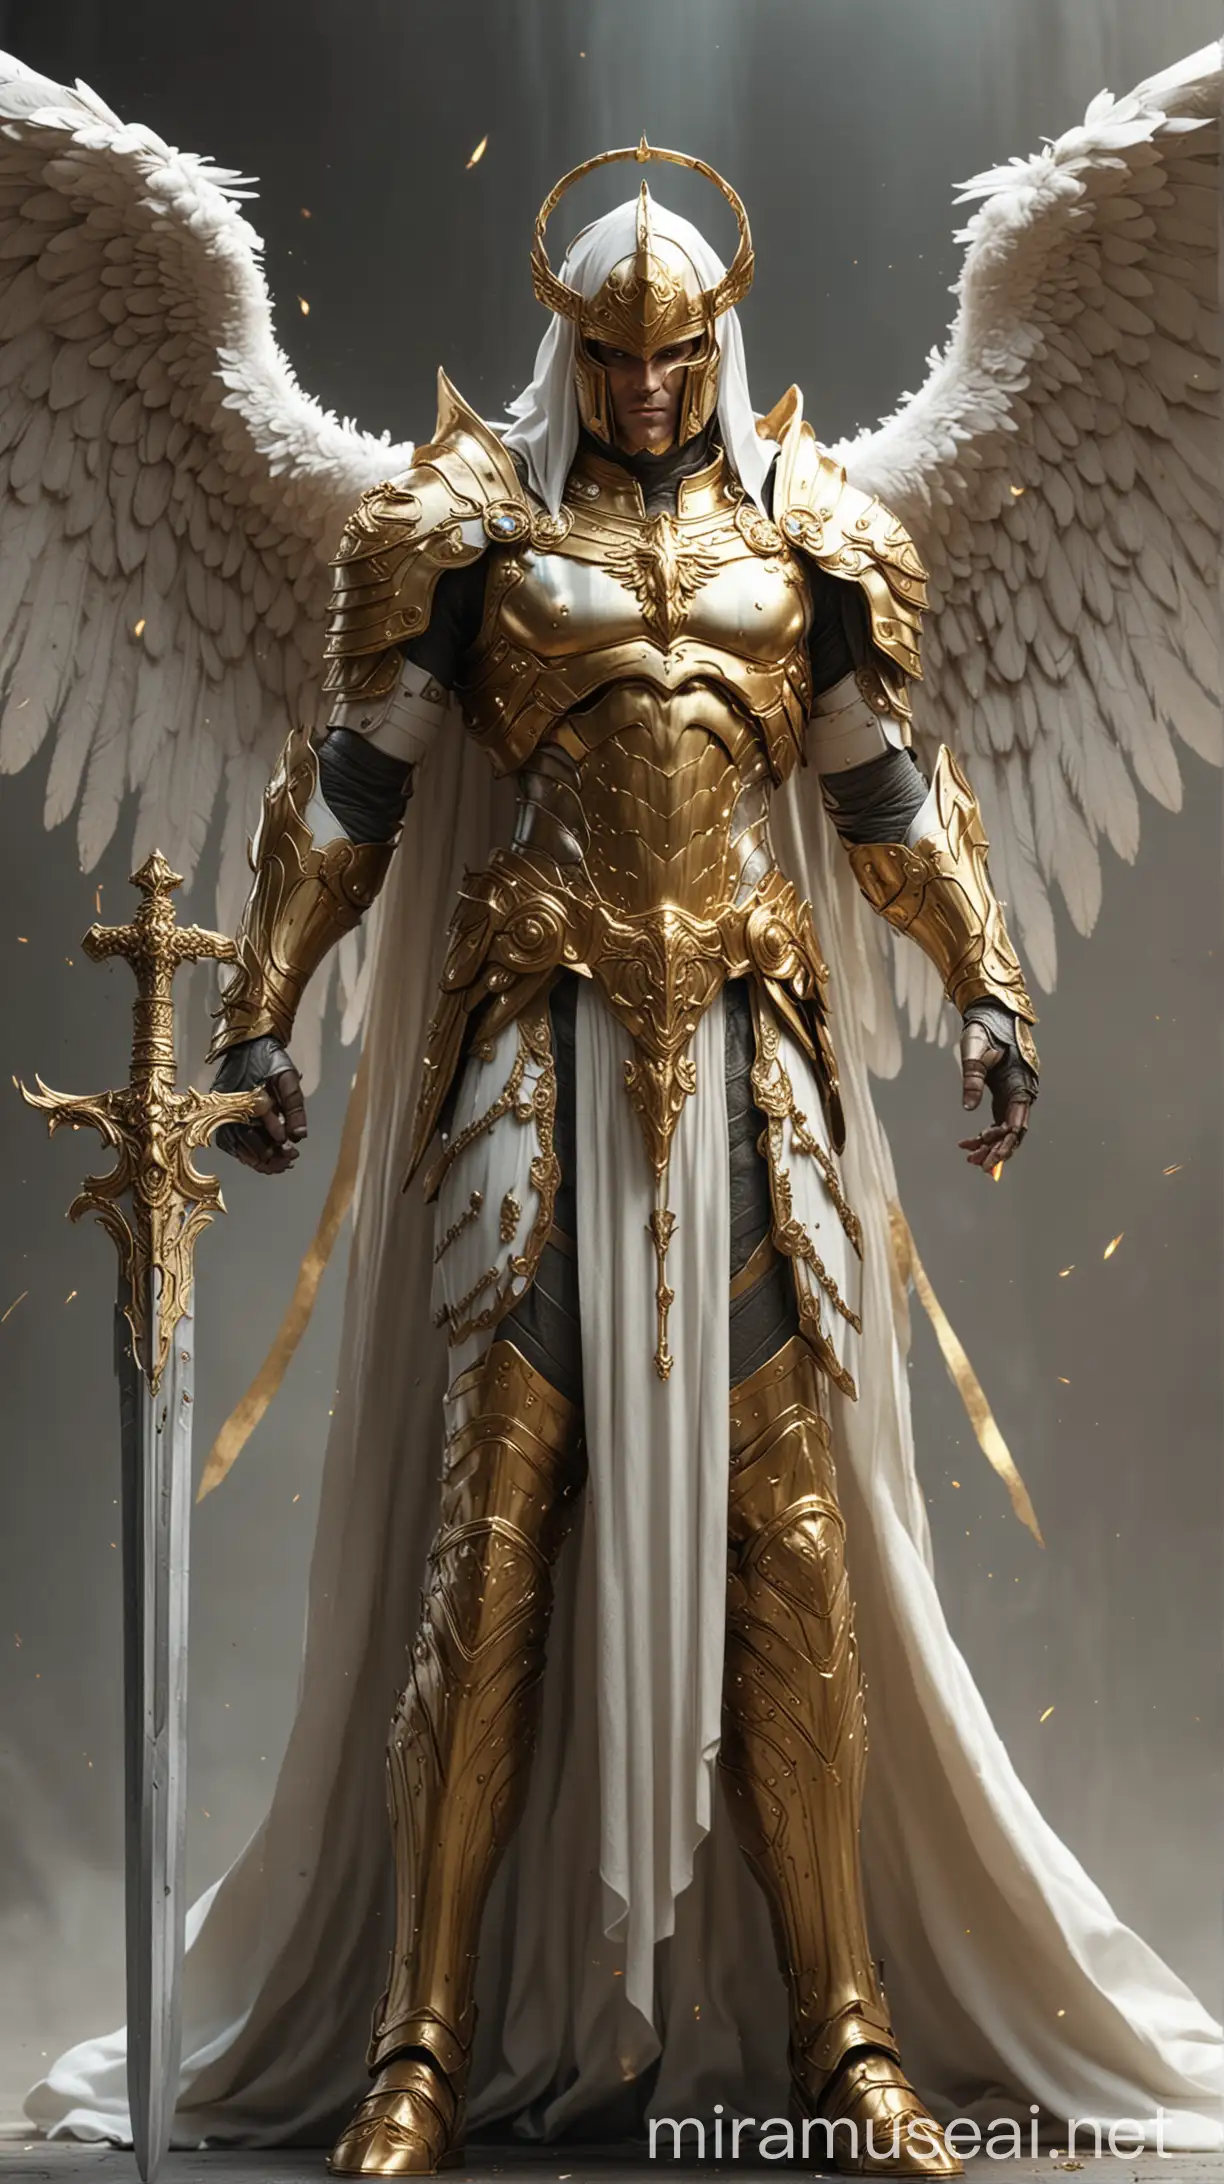 Golden Armored Archangel with Six Wings Brandishing Sword